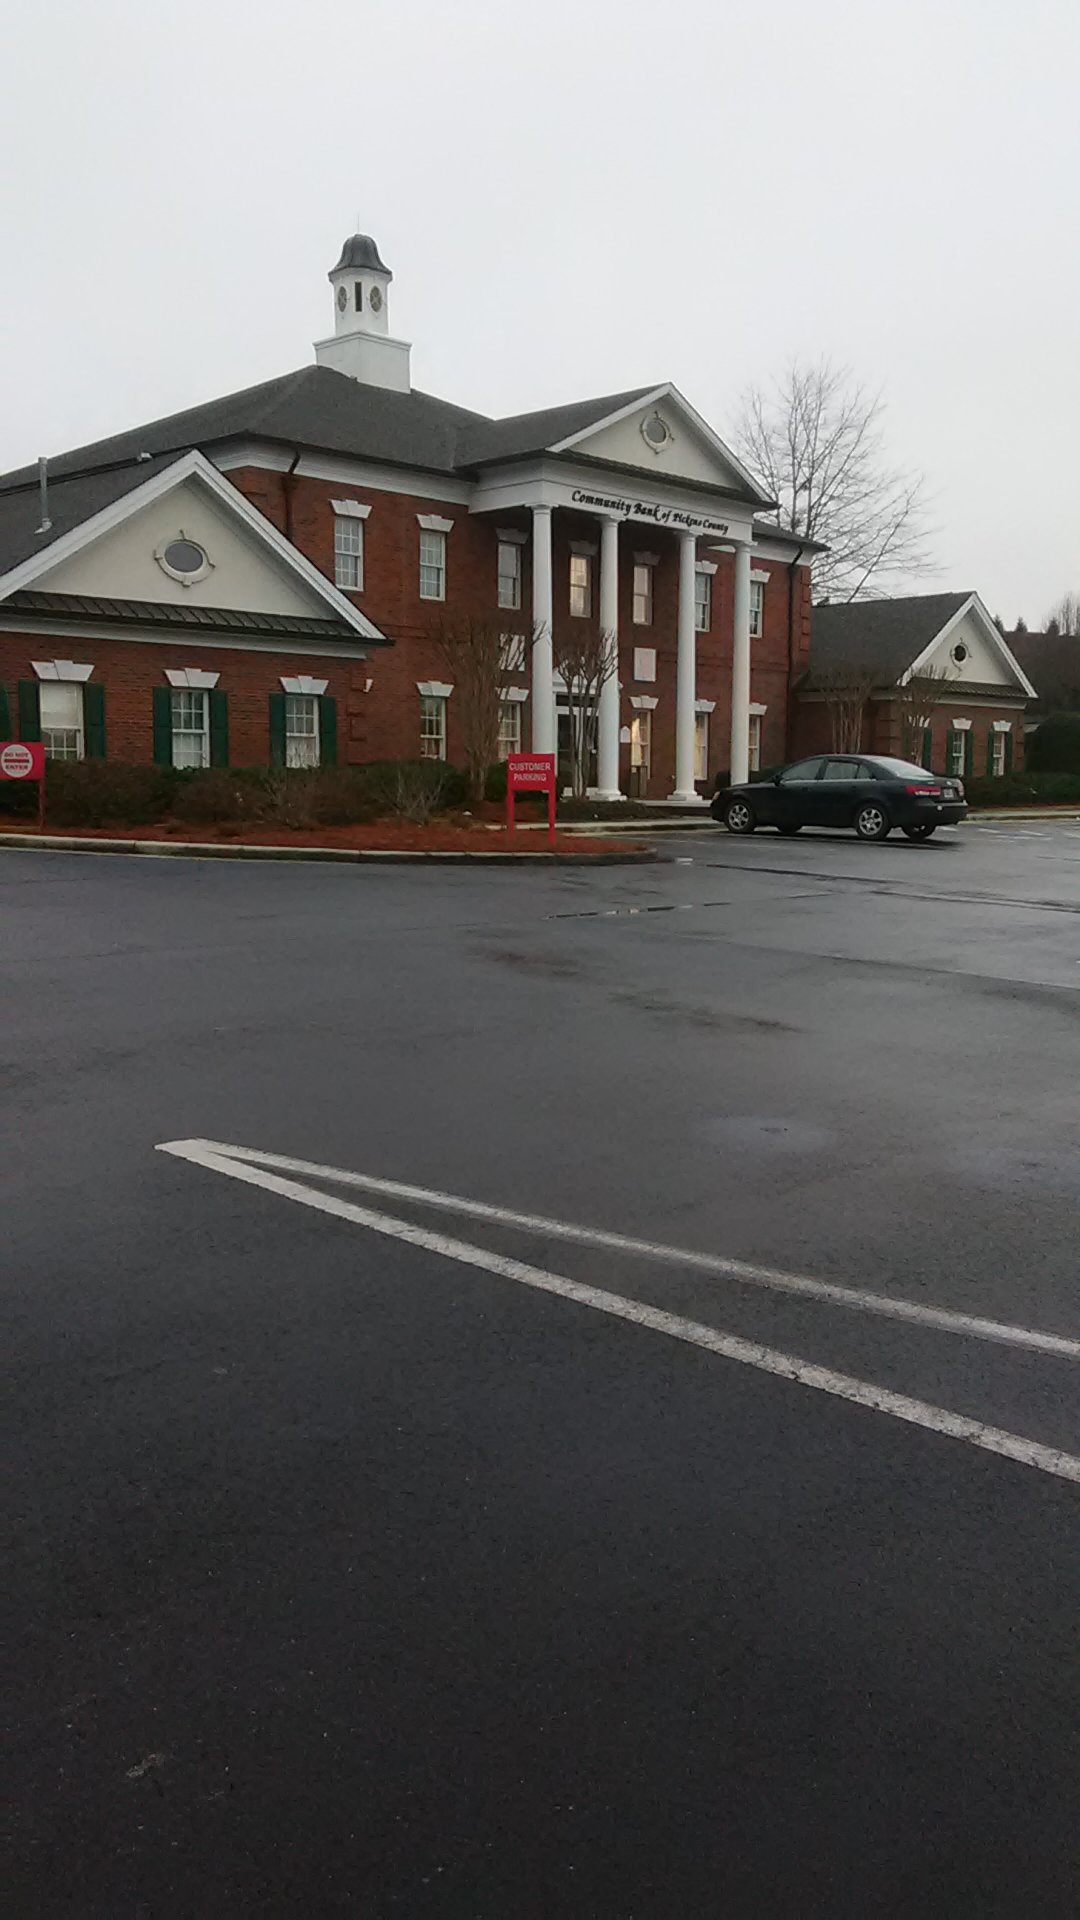 Community Bank of Pickens County